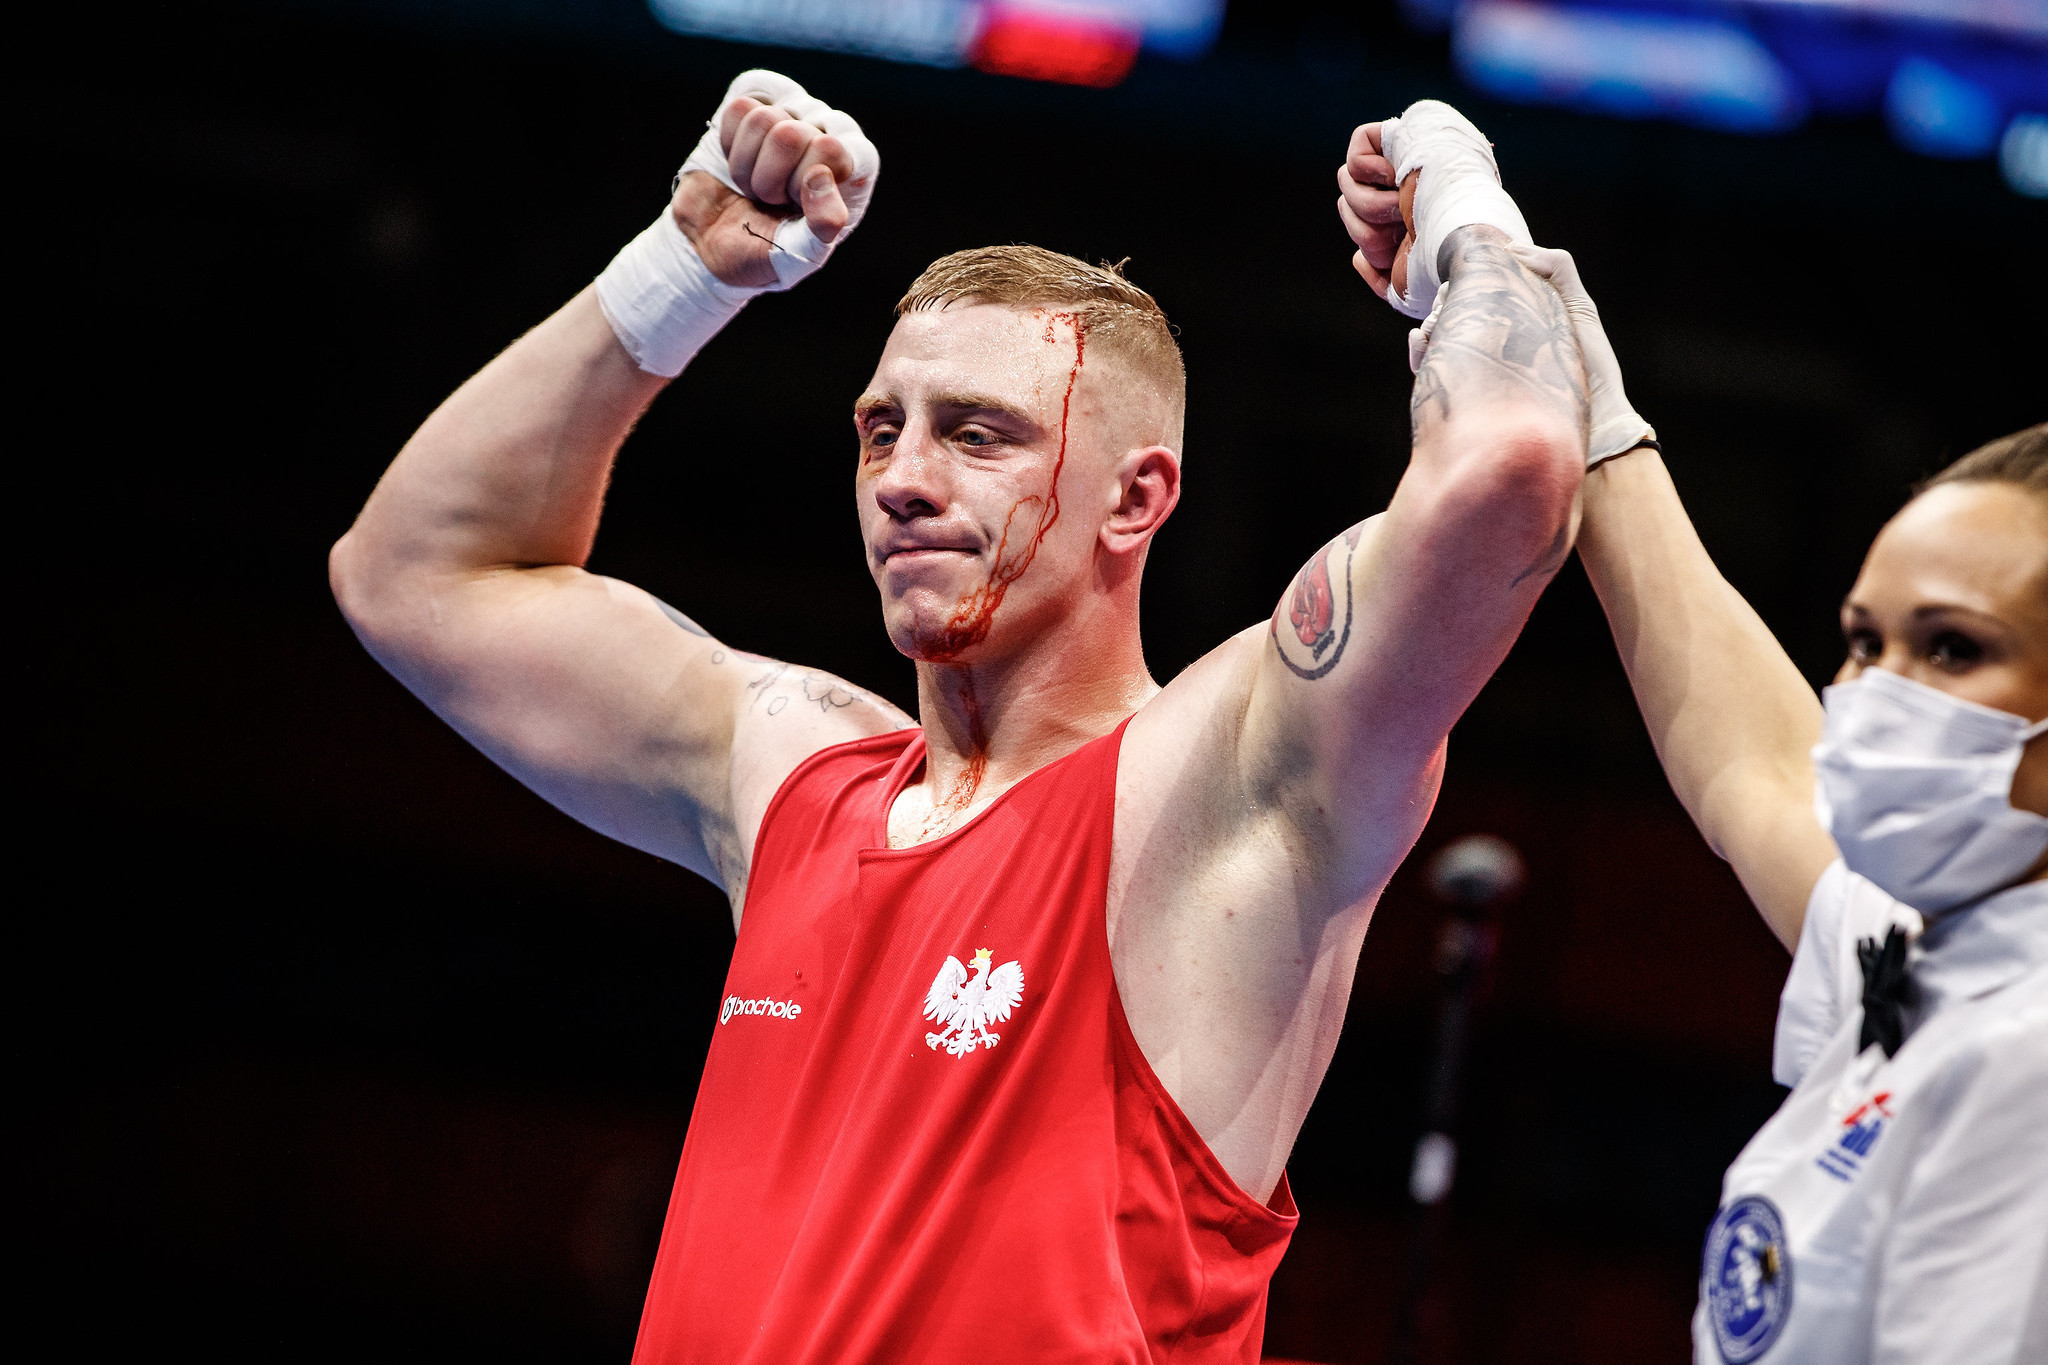 Poland's Sebastian Viktorzak was left bleeding, but more importantly, with the win after his match with Christopher Luteke of the Democratic Republic of Congo ©AIBA